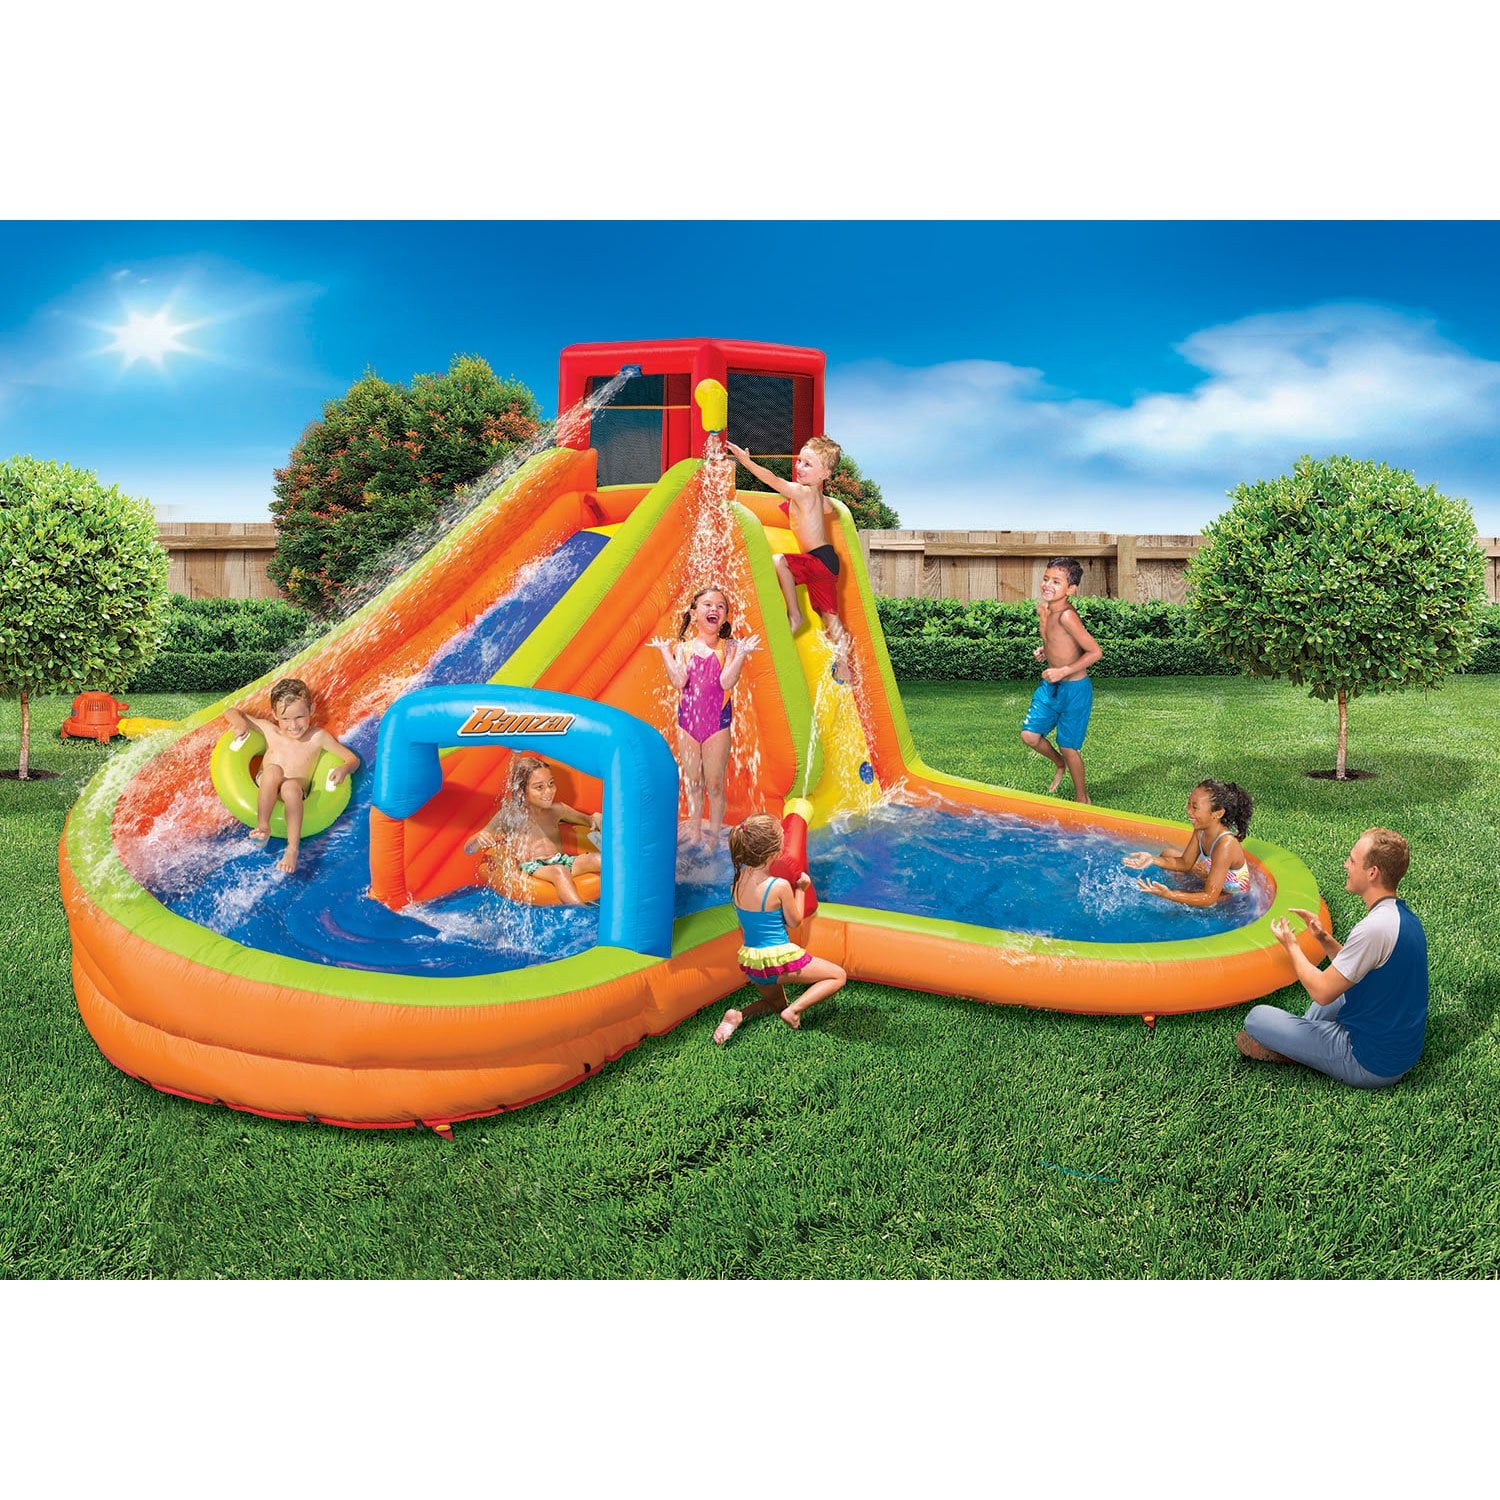 Hot Children Inflatable Swimming Pool Family Summer Outdoor Play PVC Pool Kids